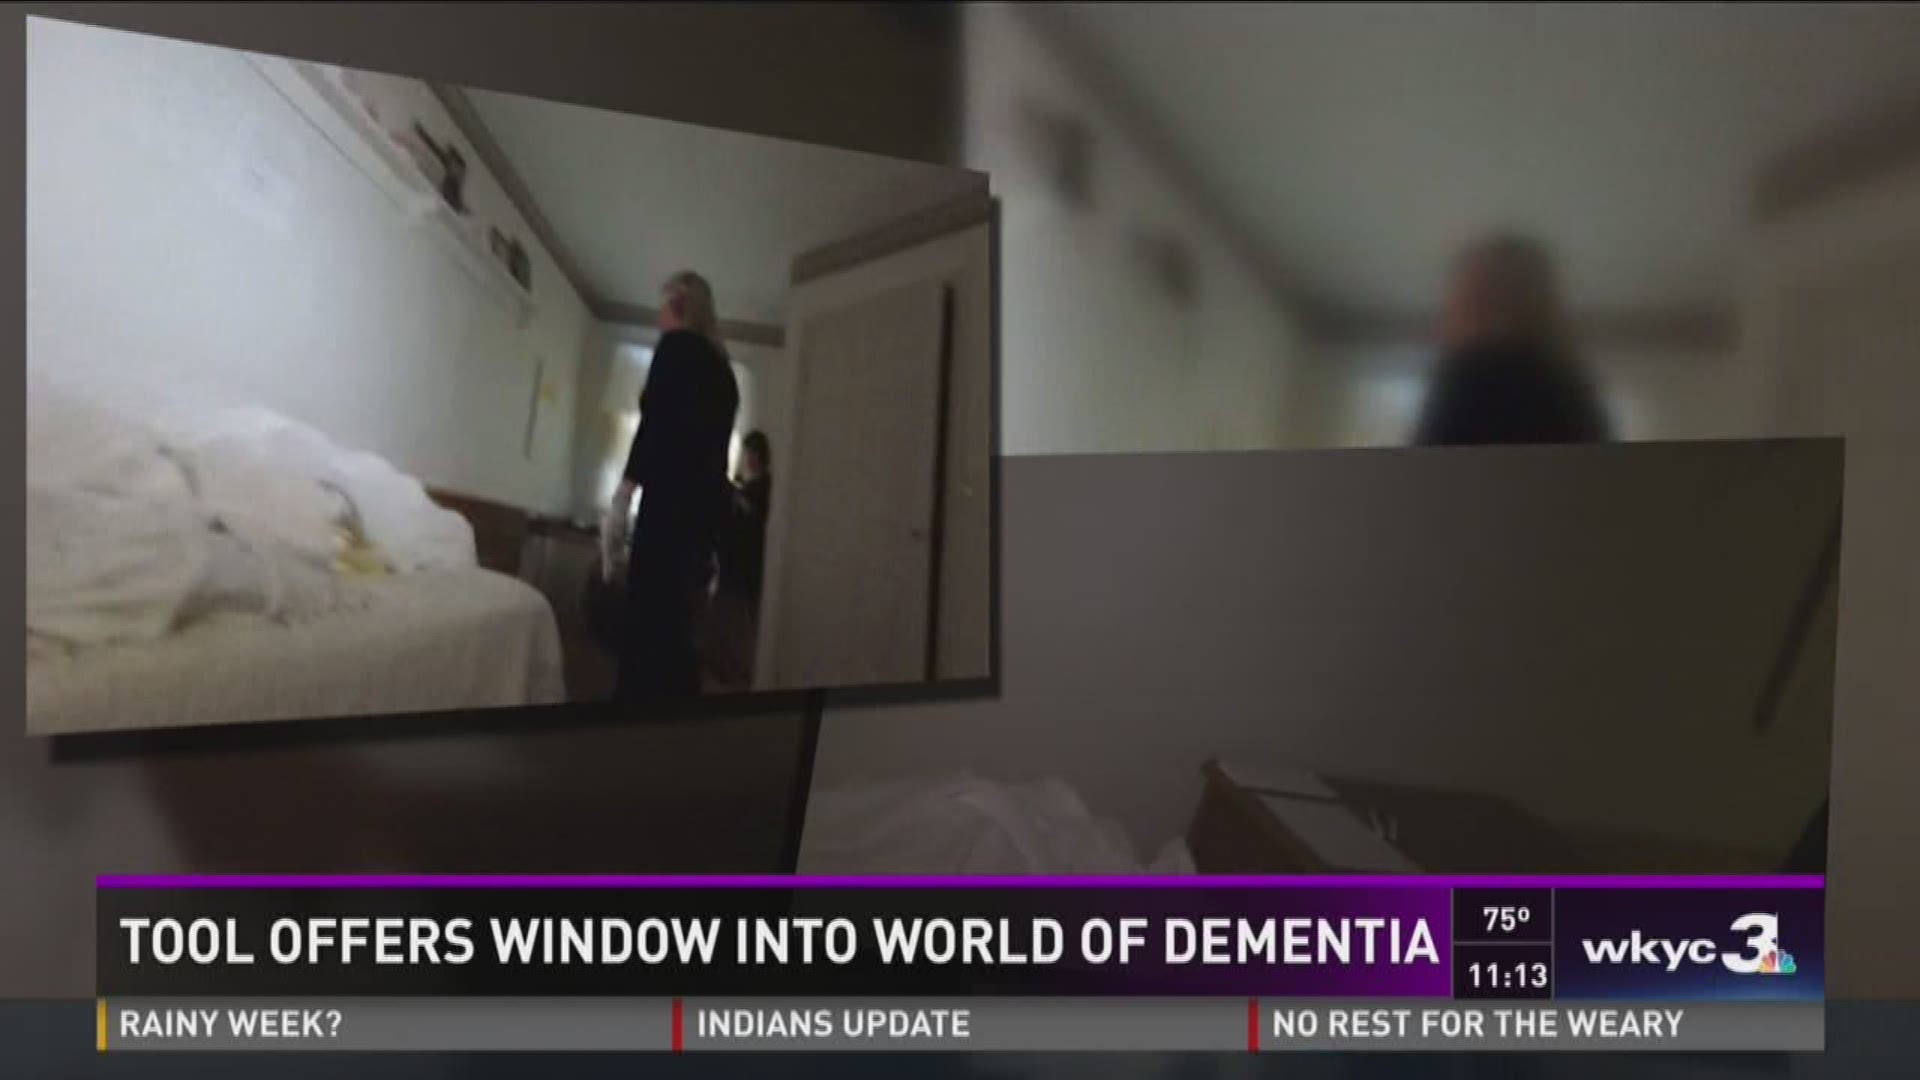 Tools offer window into the world of dementia